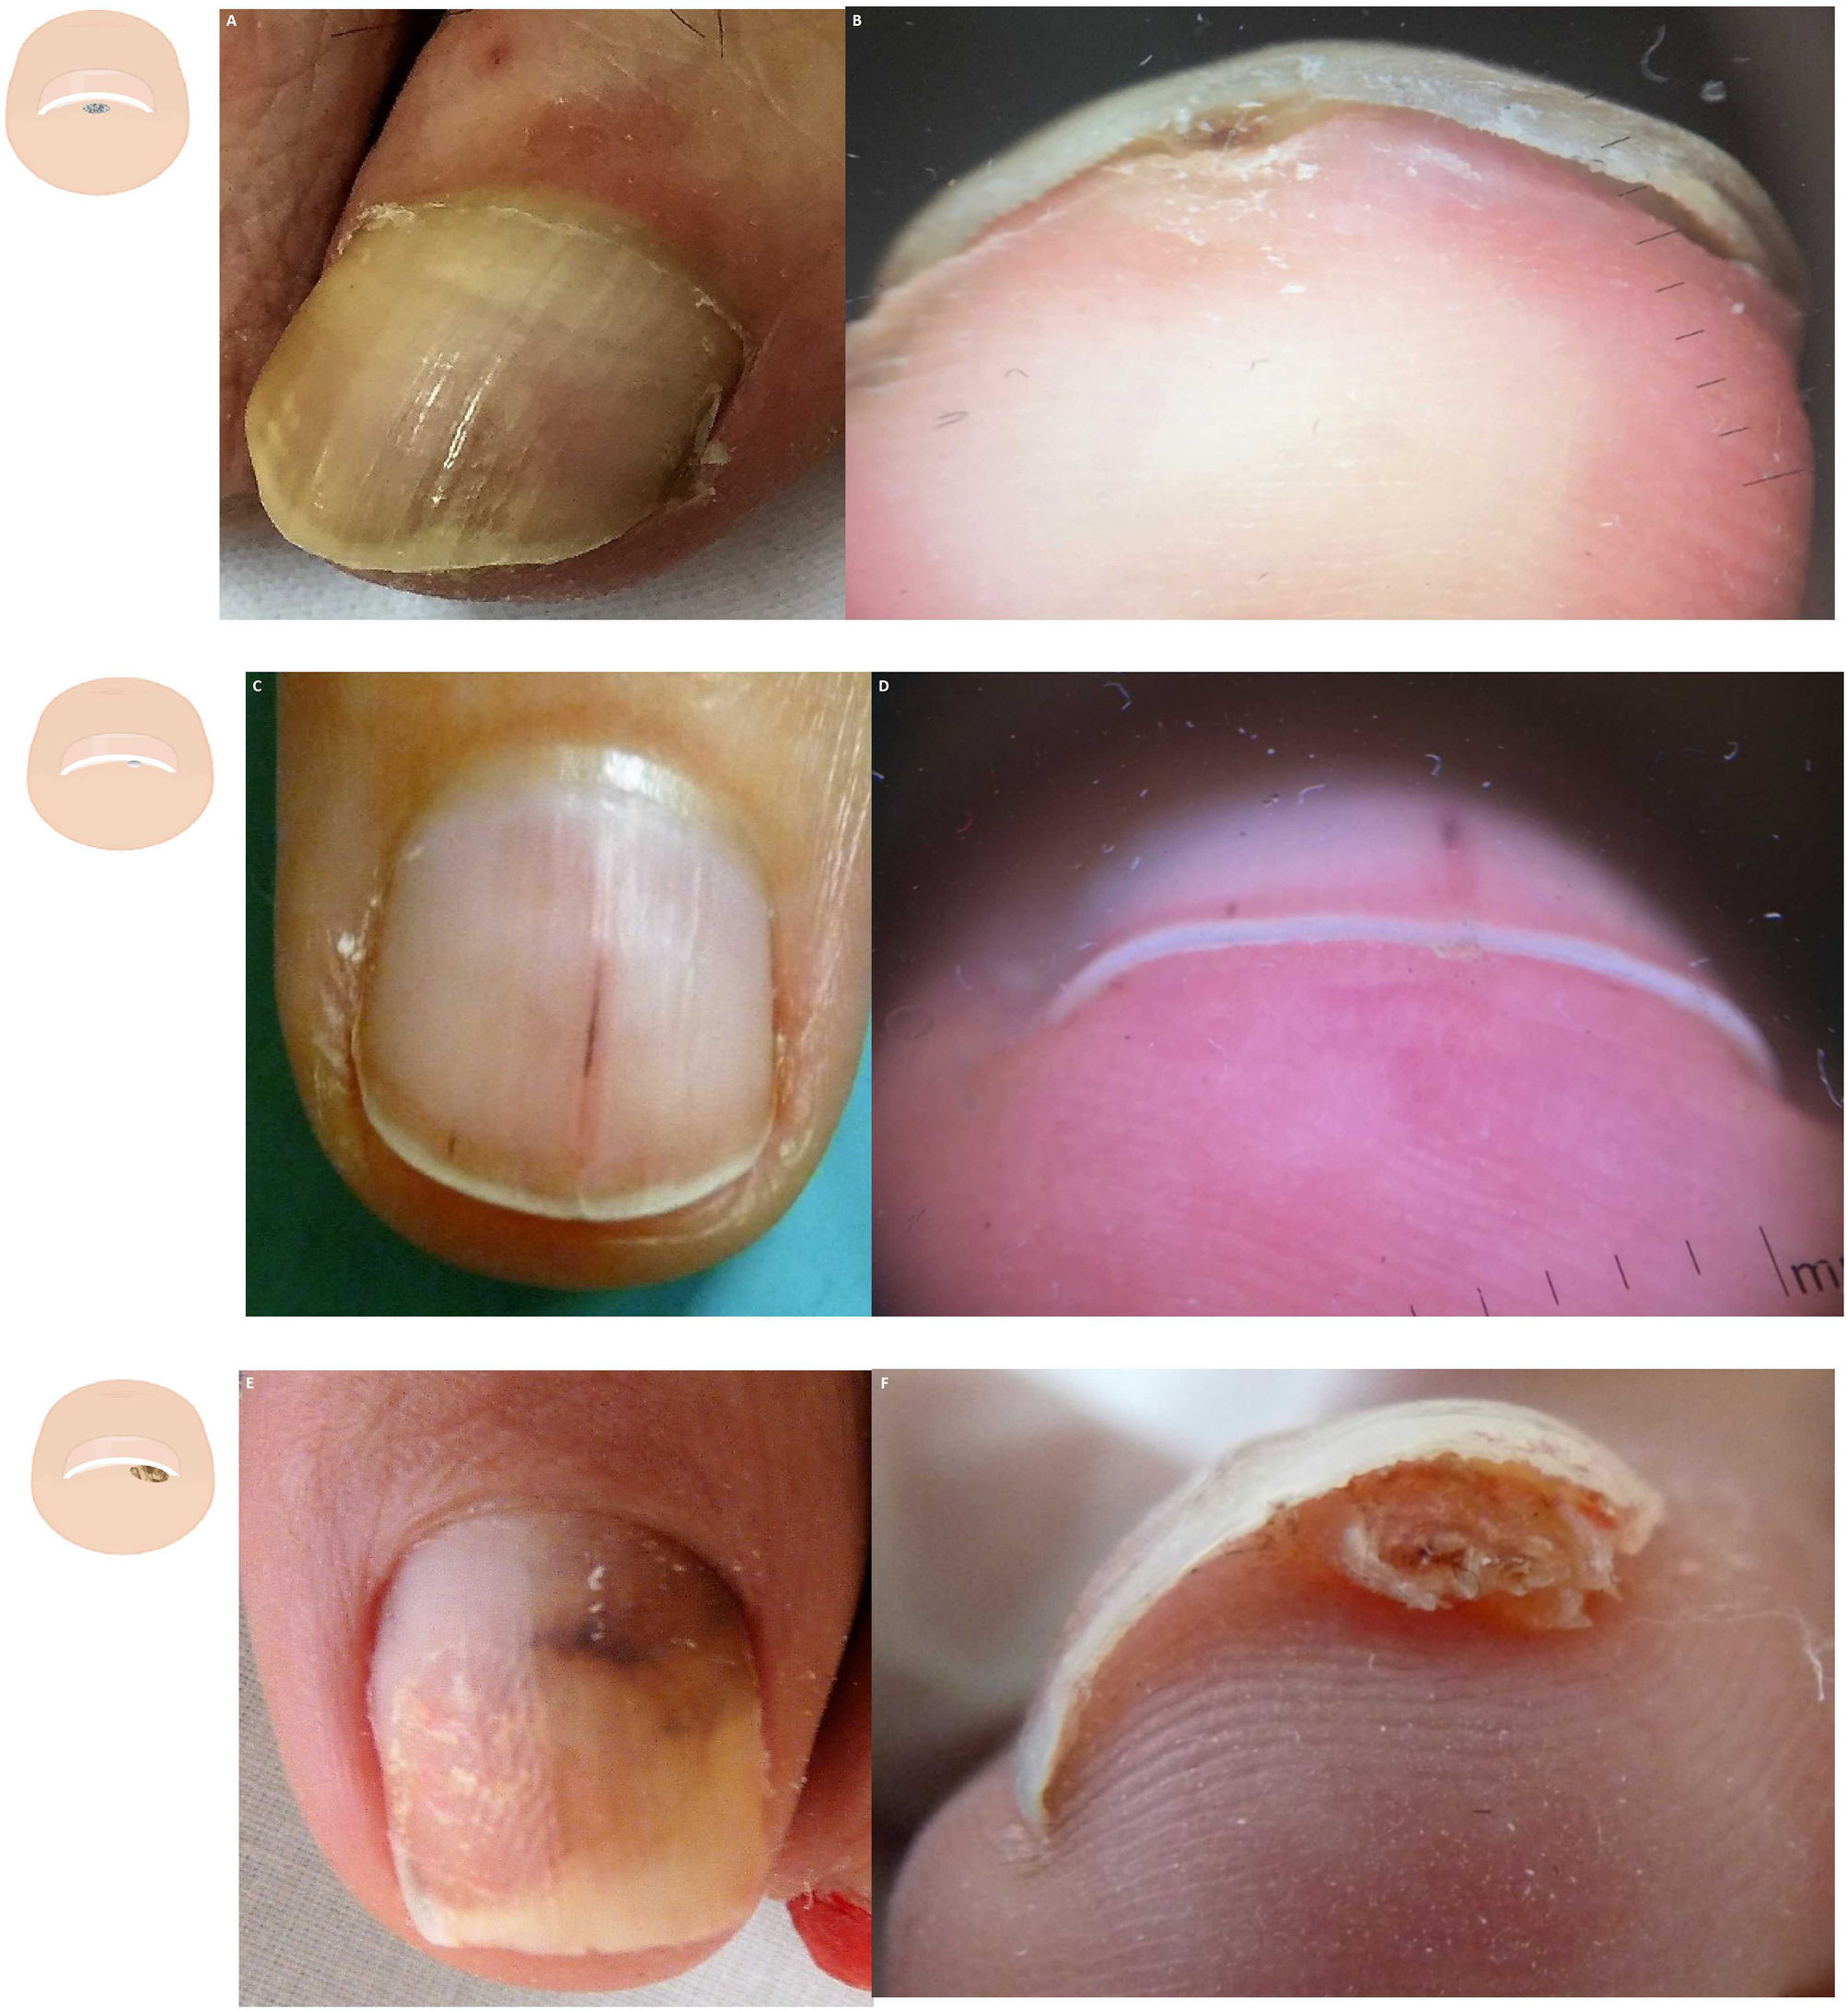 Significance of Surgery to Correct Anatomical Alterations in Pincer Nails